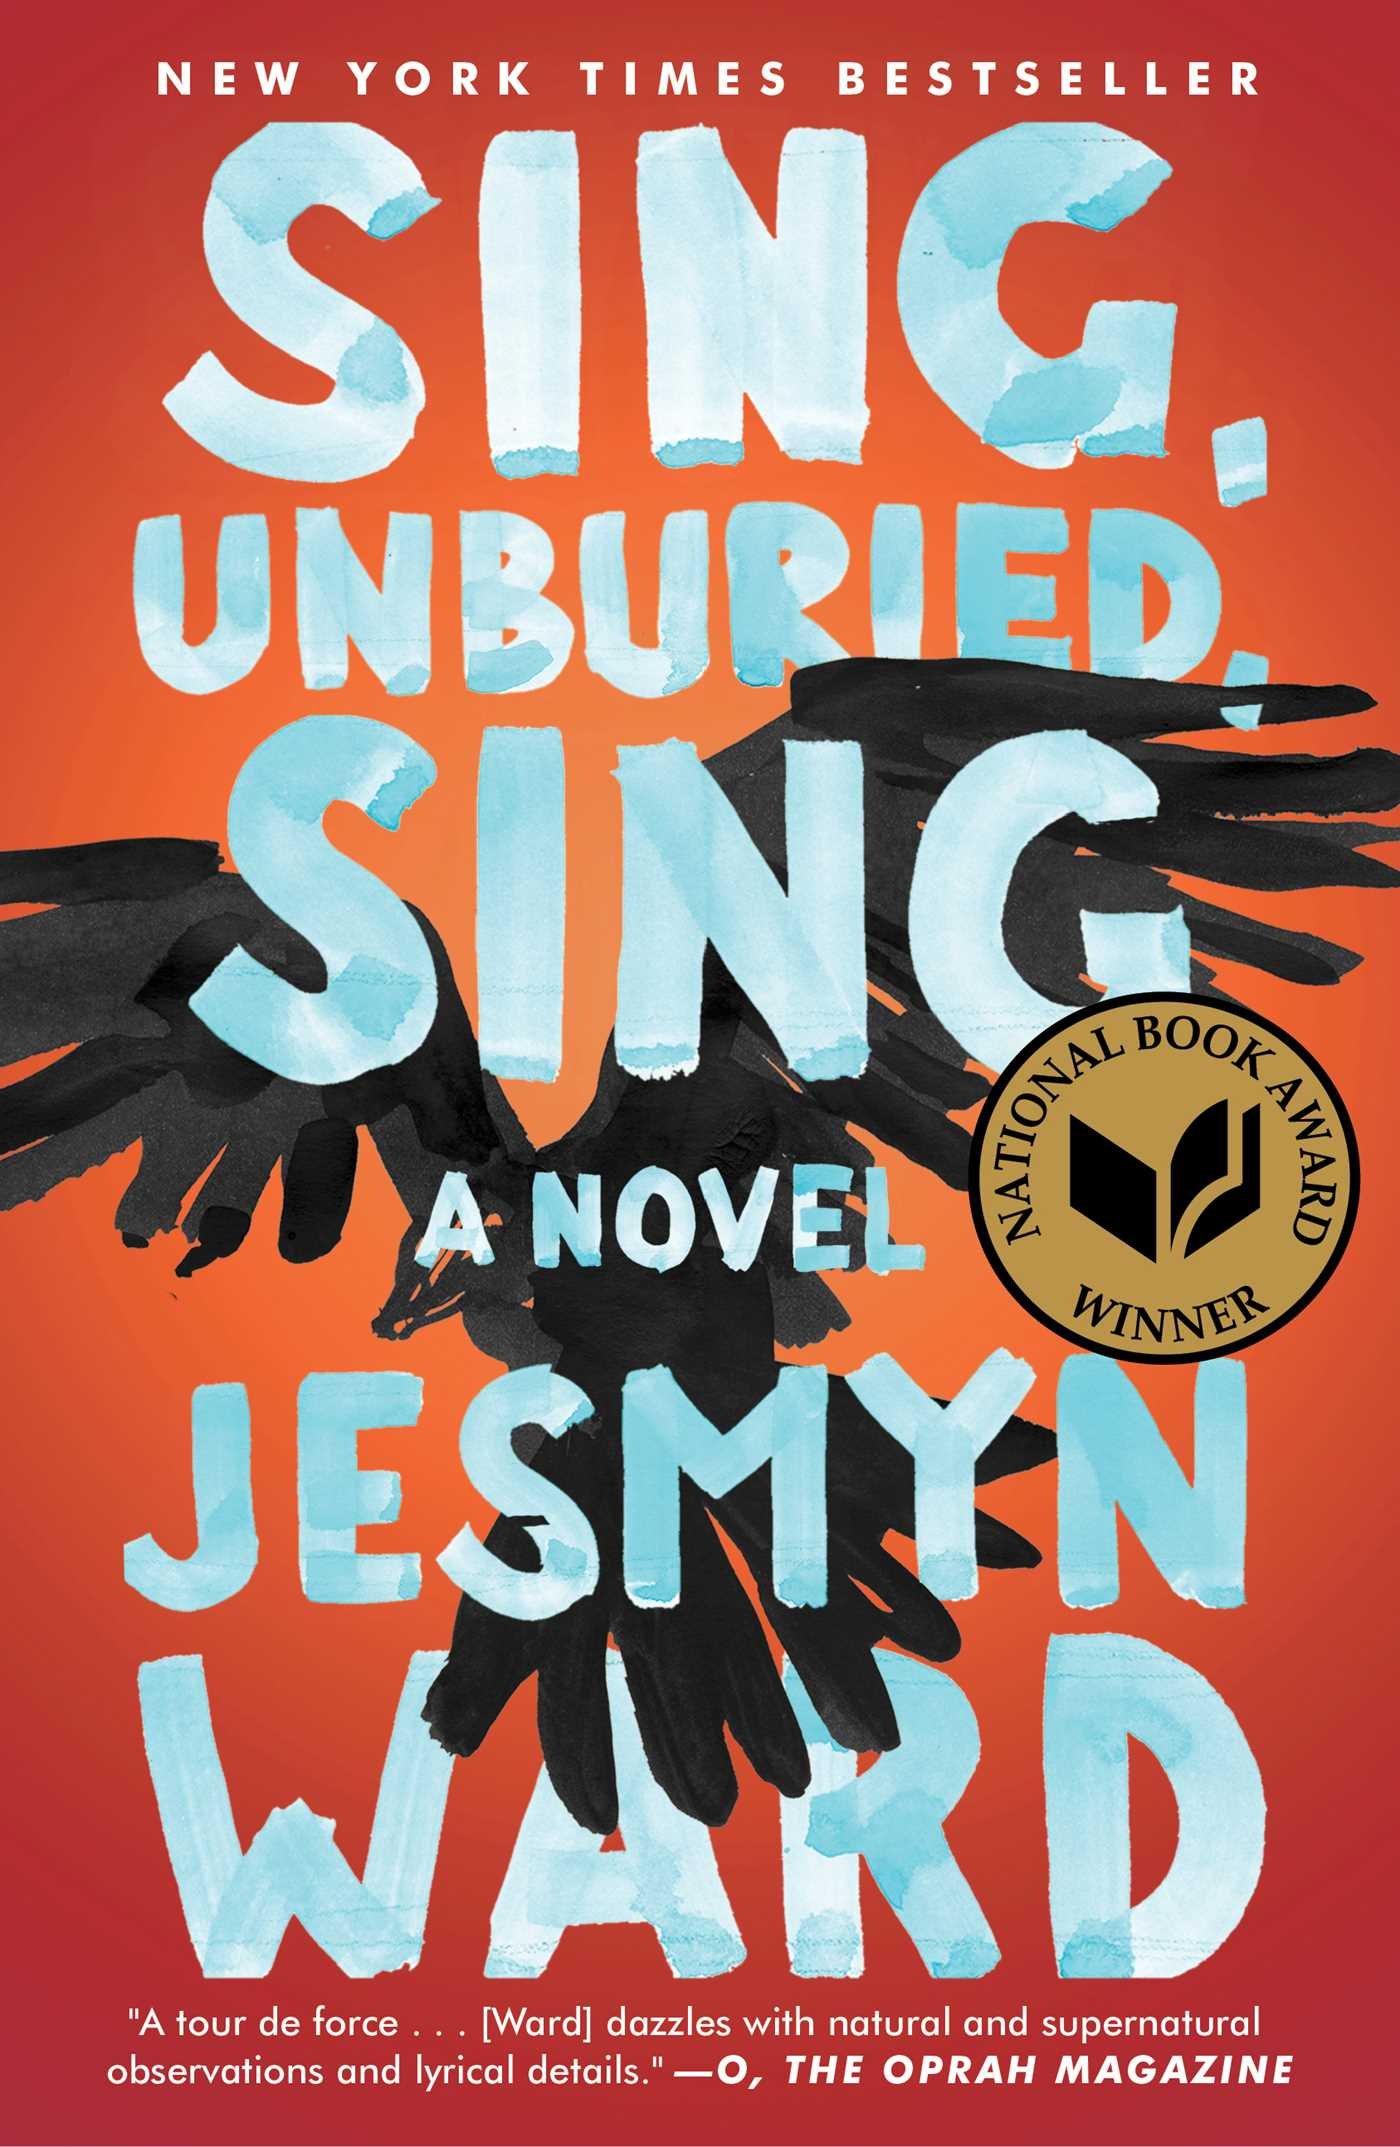 A vibrant book cover with striking black brush strokes and orange background for jesmyn ward's acclaimed novel "sing, unburied, sing," highlighting its status as a new york times bestseller and national book award winner.